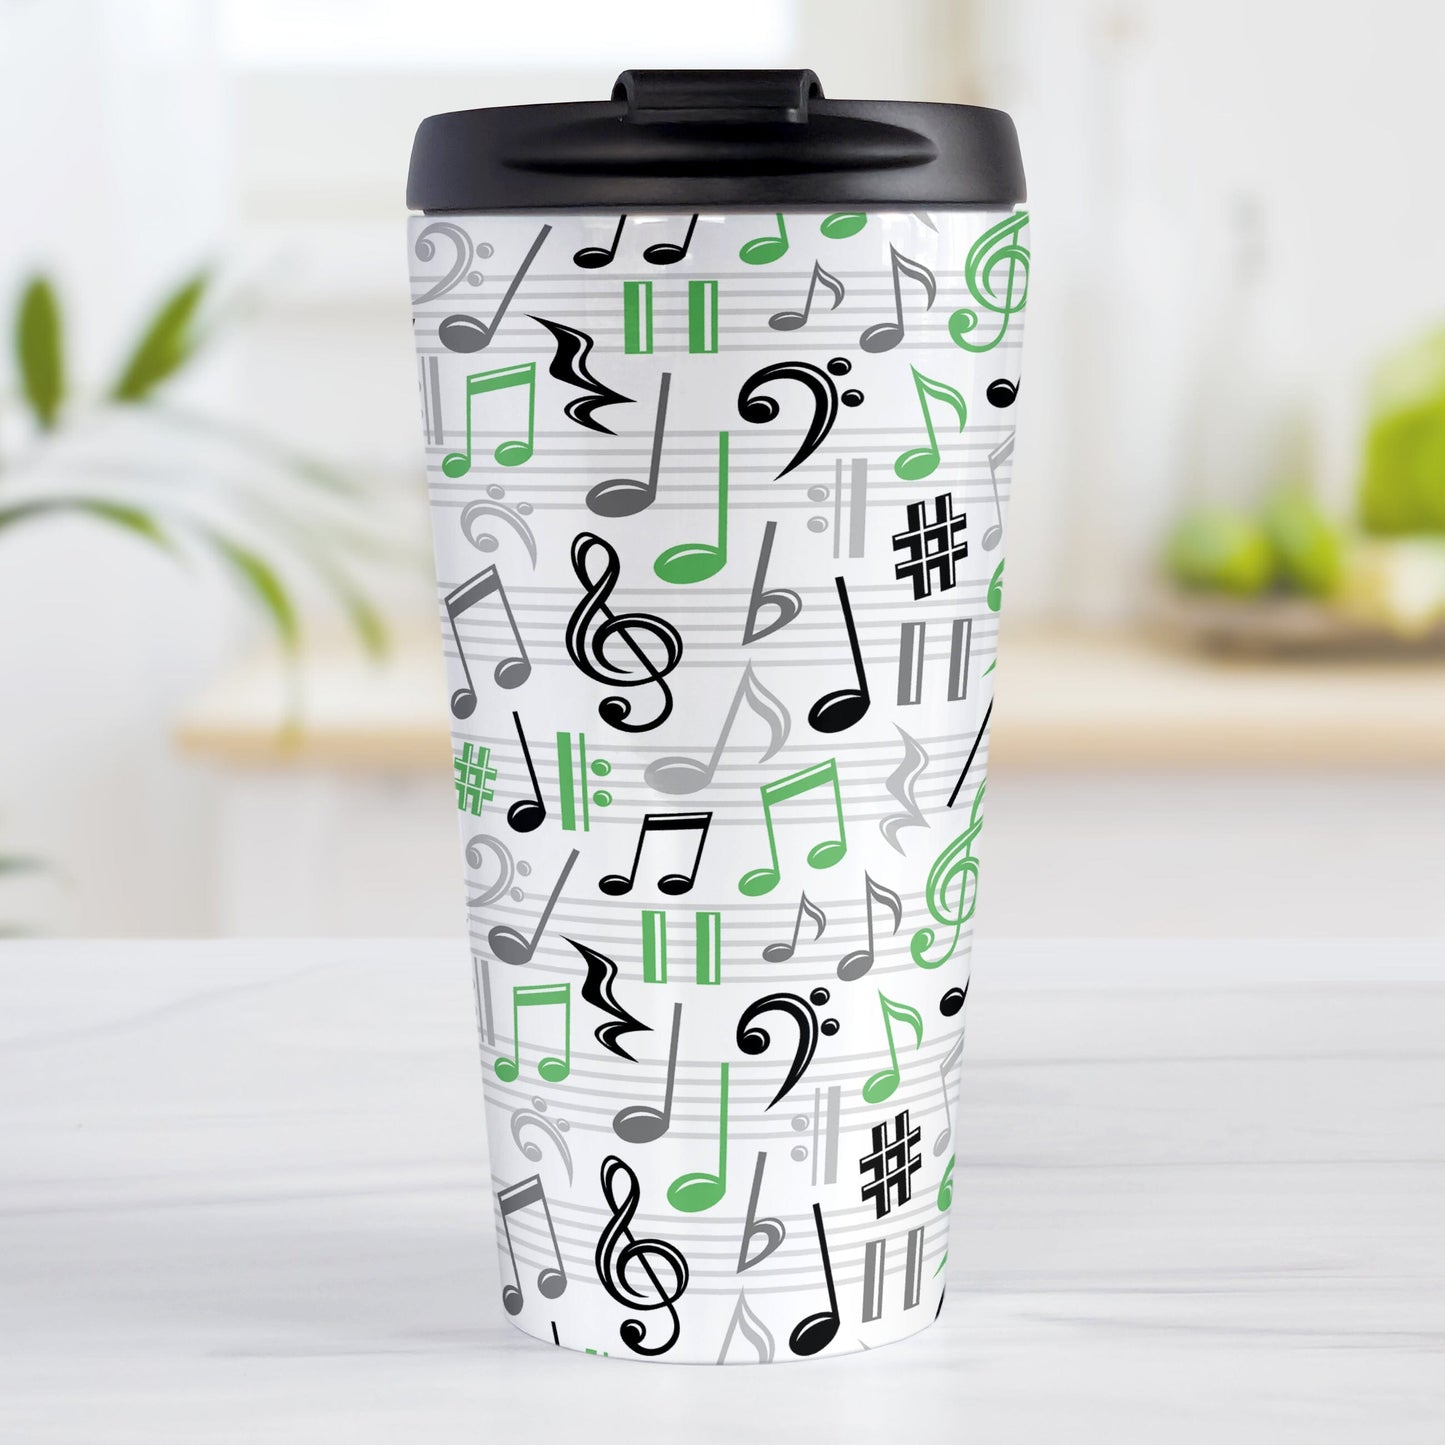 Green Music Notes Pattern Travel Mug (15oz) at Amy's Coffee Mugs. A stainless steel travel mug designed with music notes and symbols in green, black, and gray in a pattern that wraps around the travel mug.